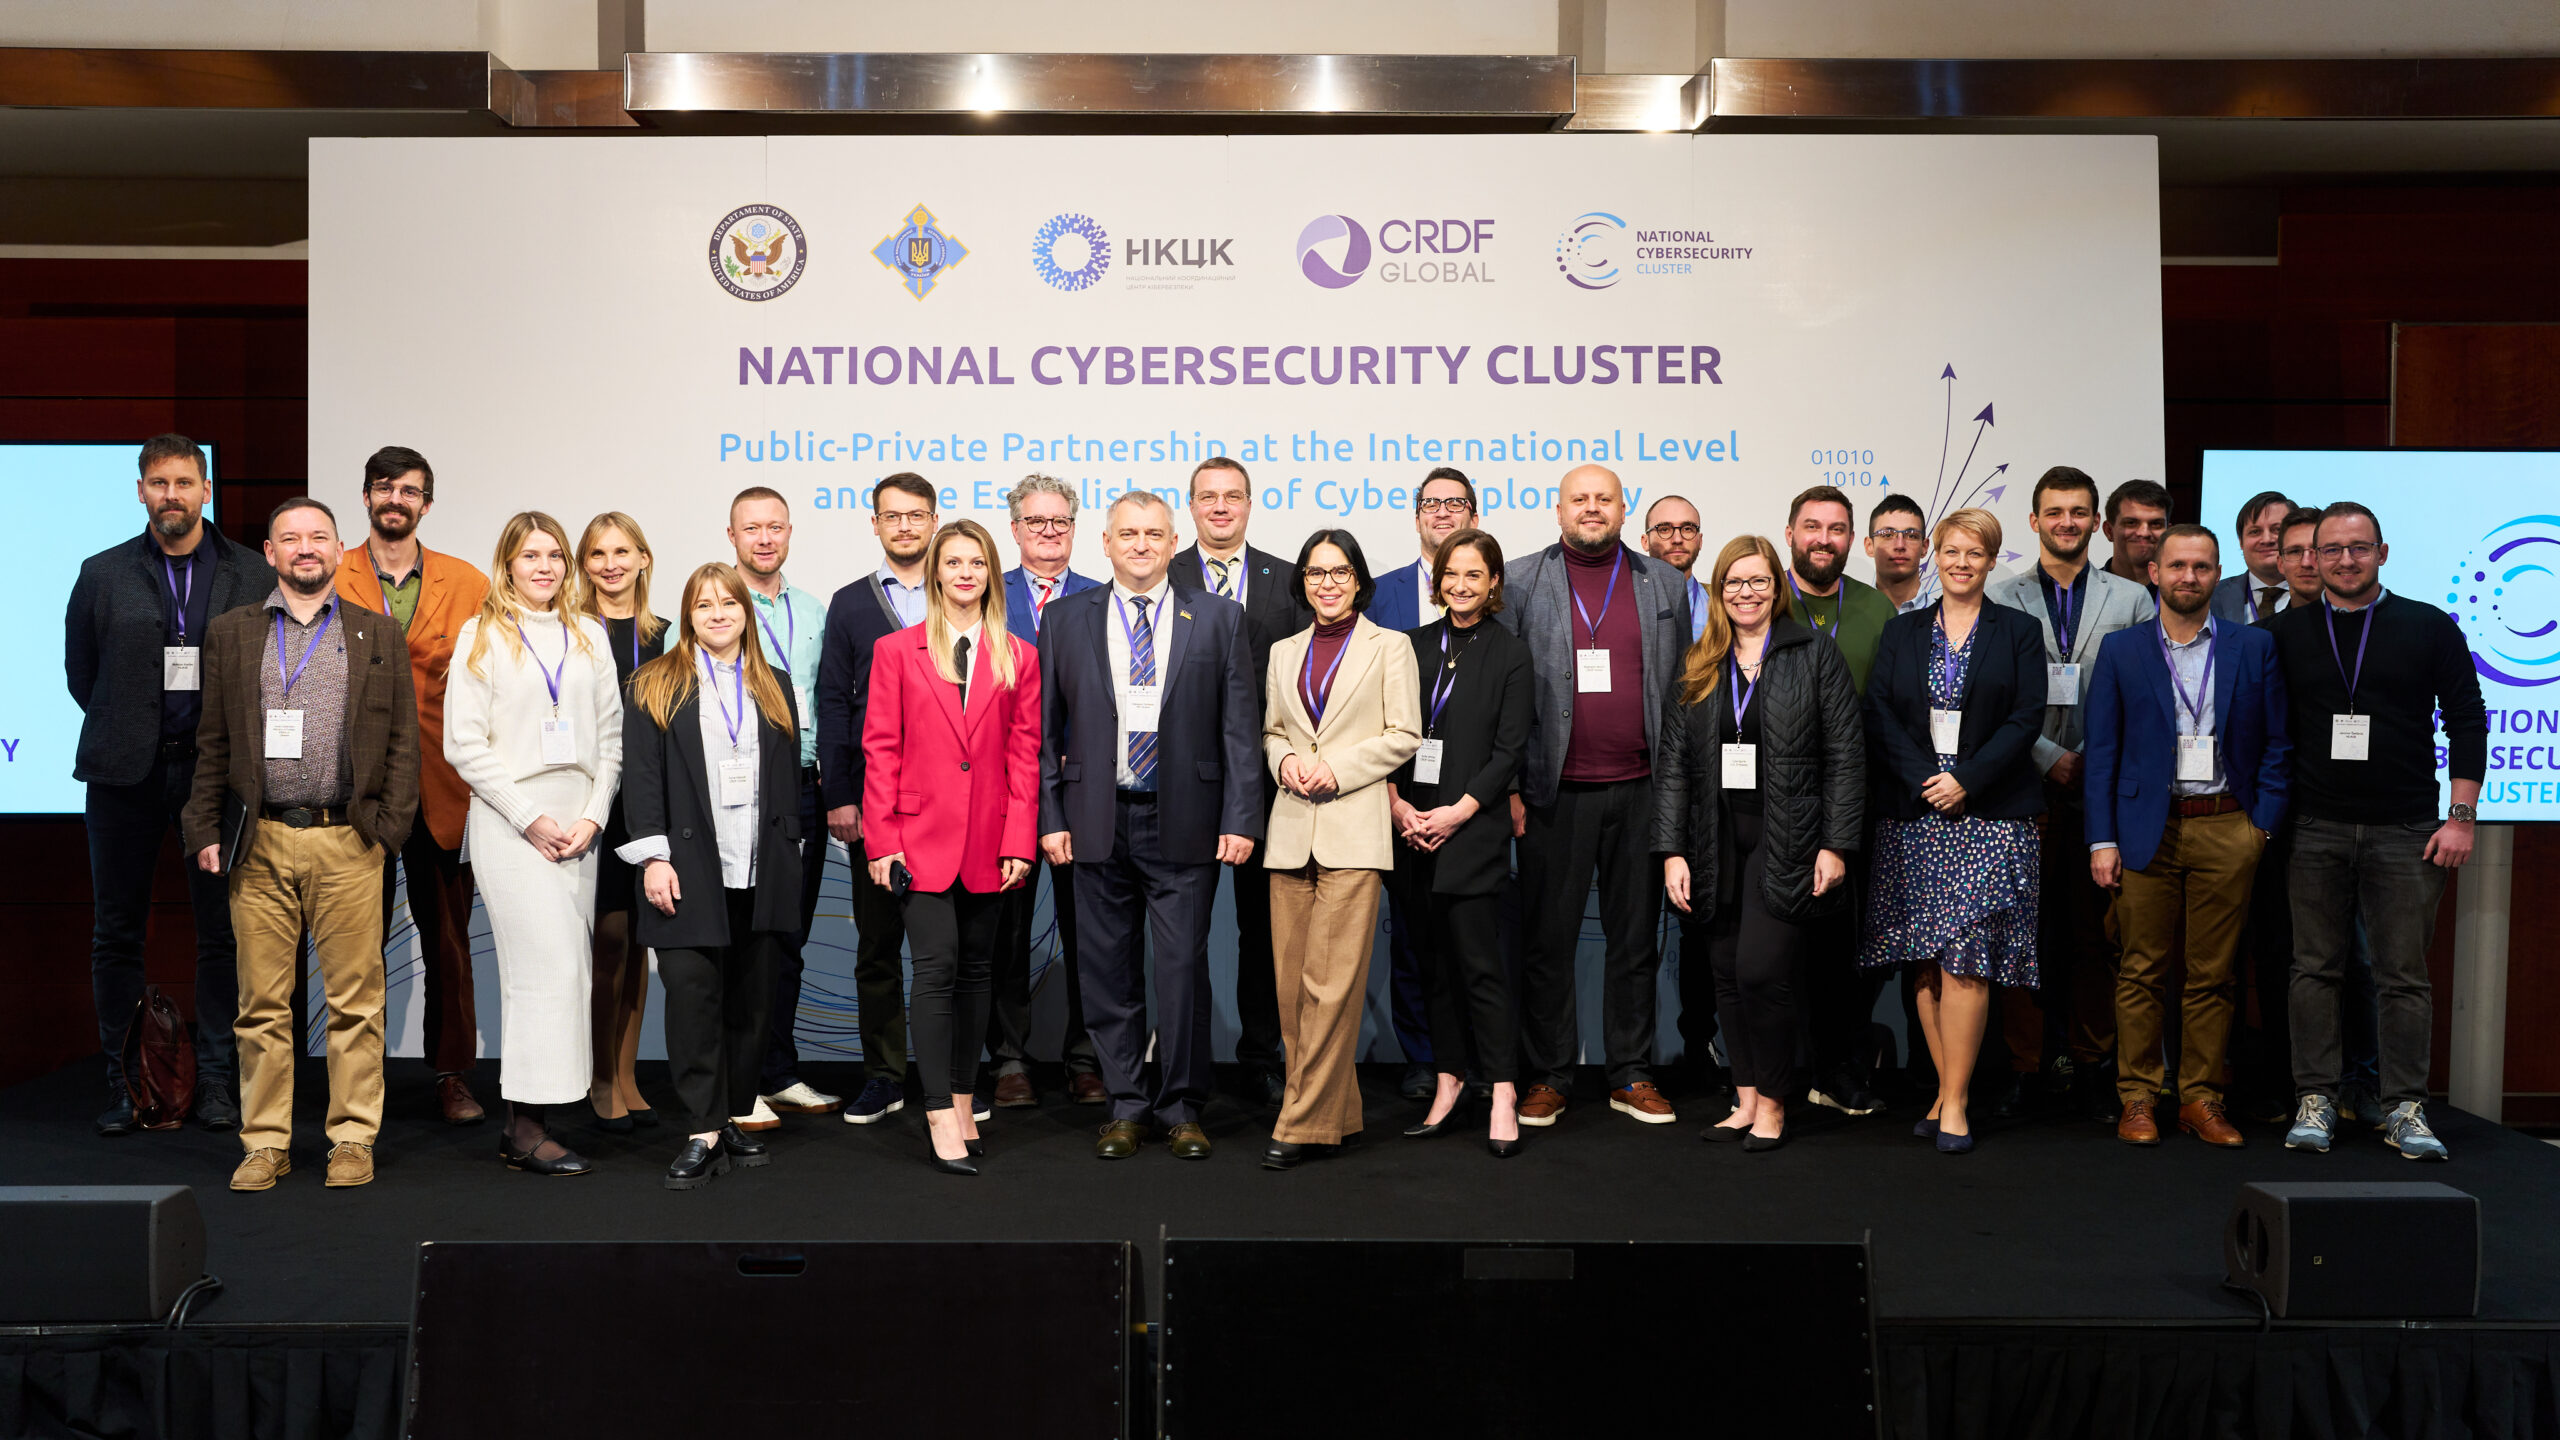 National Cybersecurity Cluster Became a Platform for Cyber Dialogue at the International Level for the Second Time